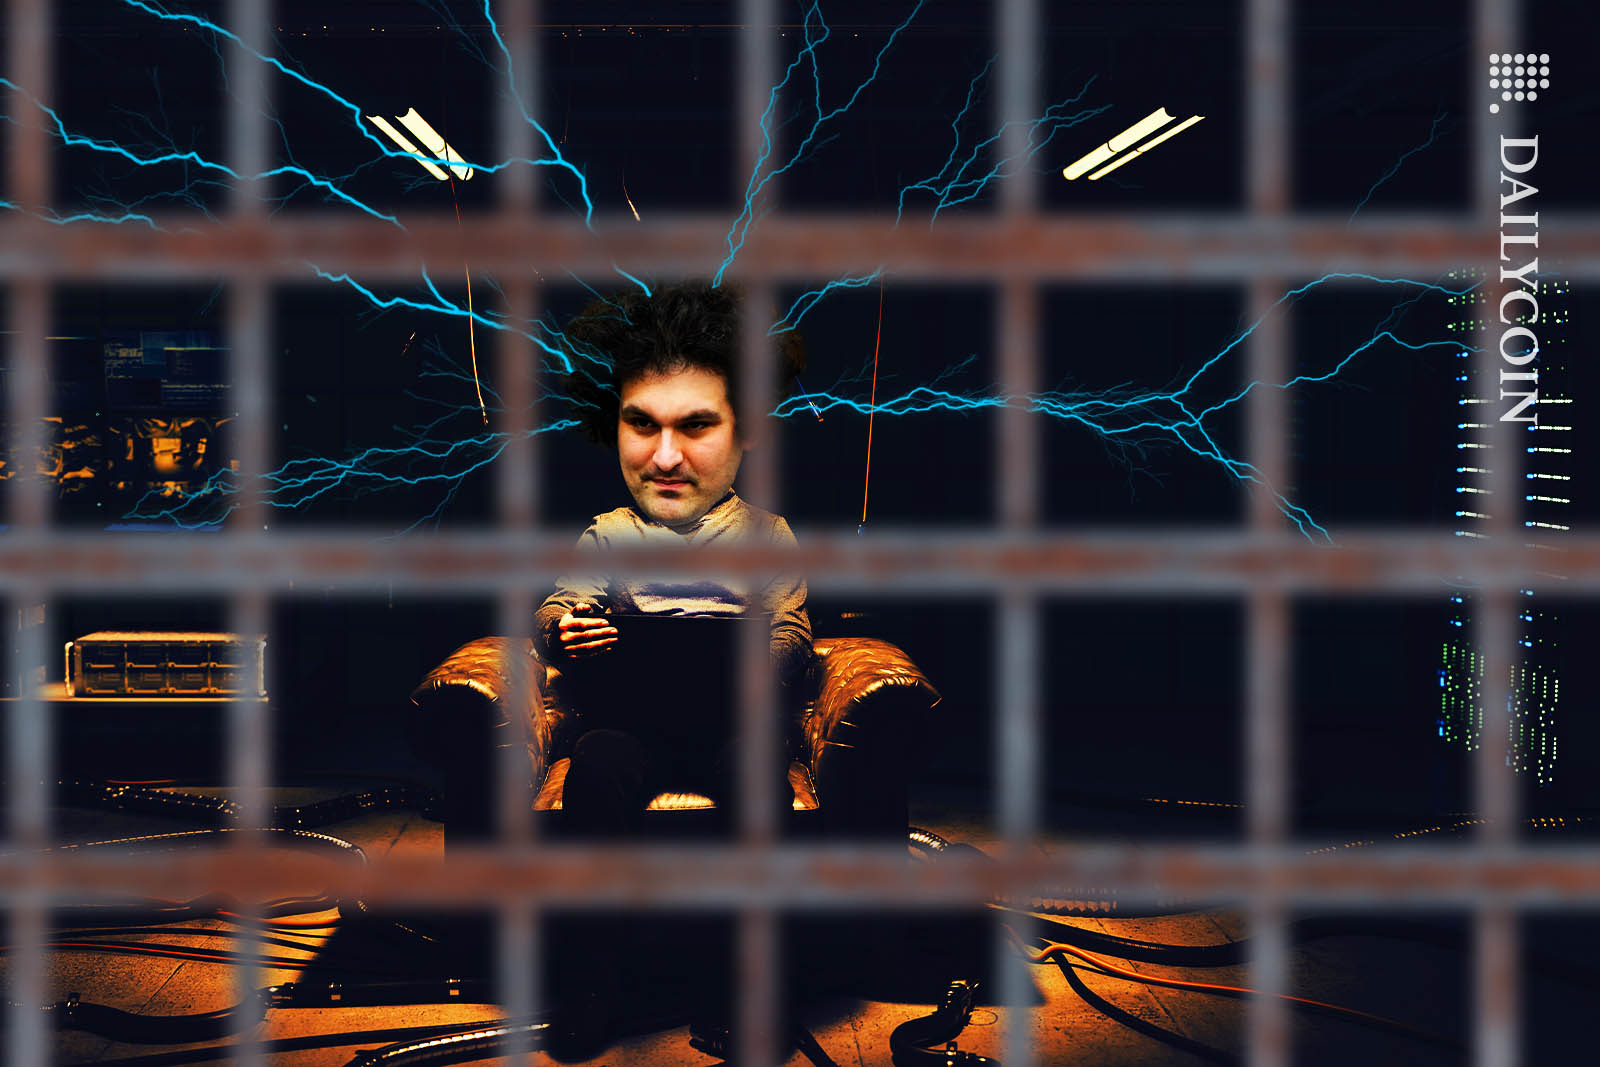 Sam Bankman Fried doing some crypto related monkey business with his computer in a prison cell.